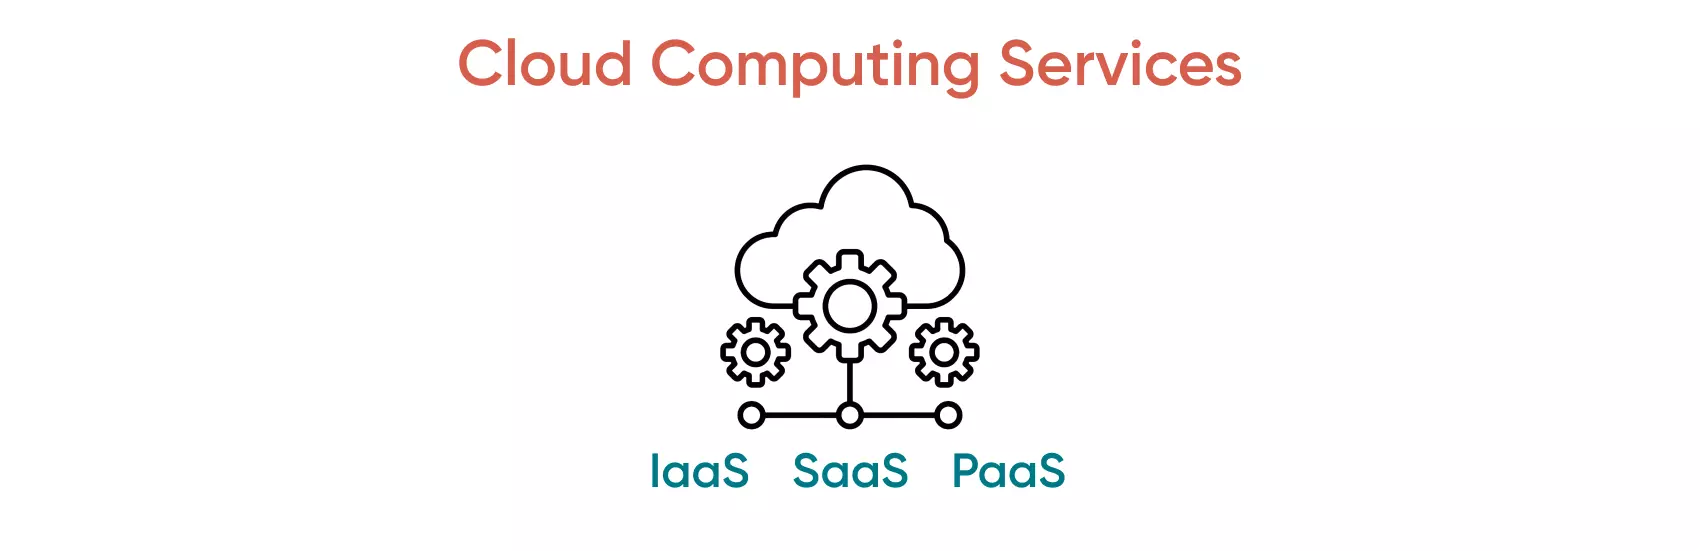 Of the three services listed here, SaaS is the more comprehensive as it offers a wider array of options. Discover why by reading further.